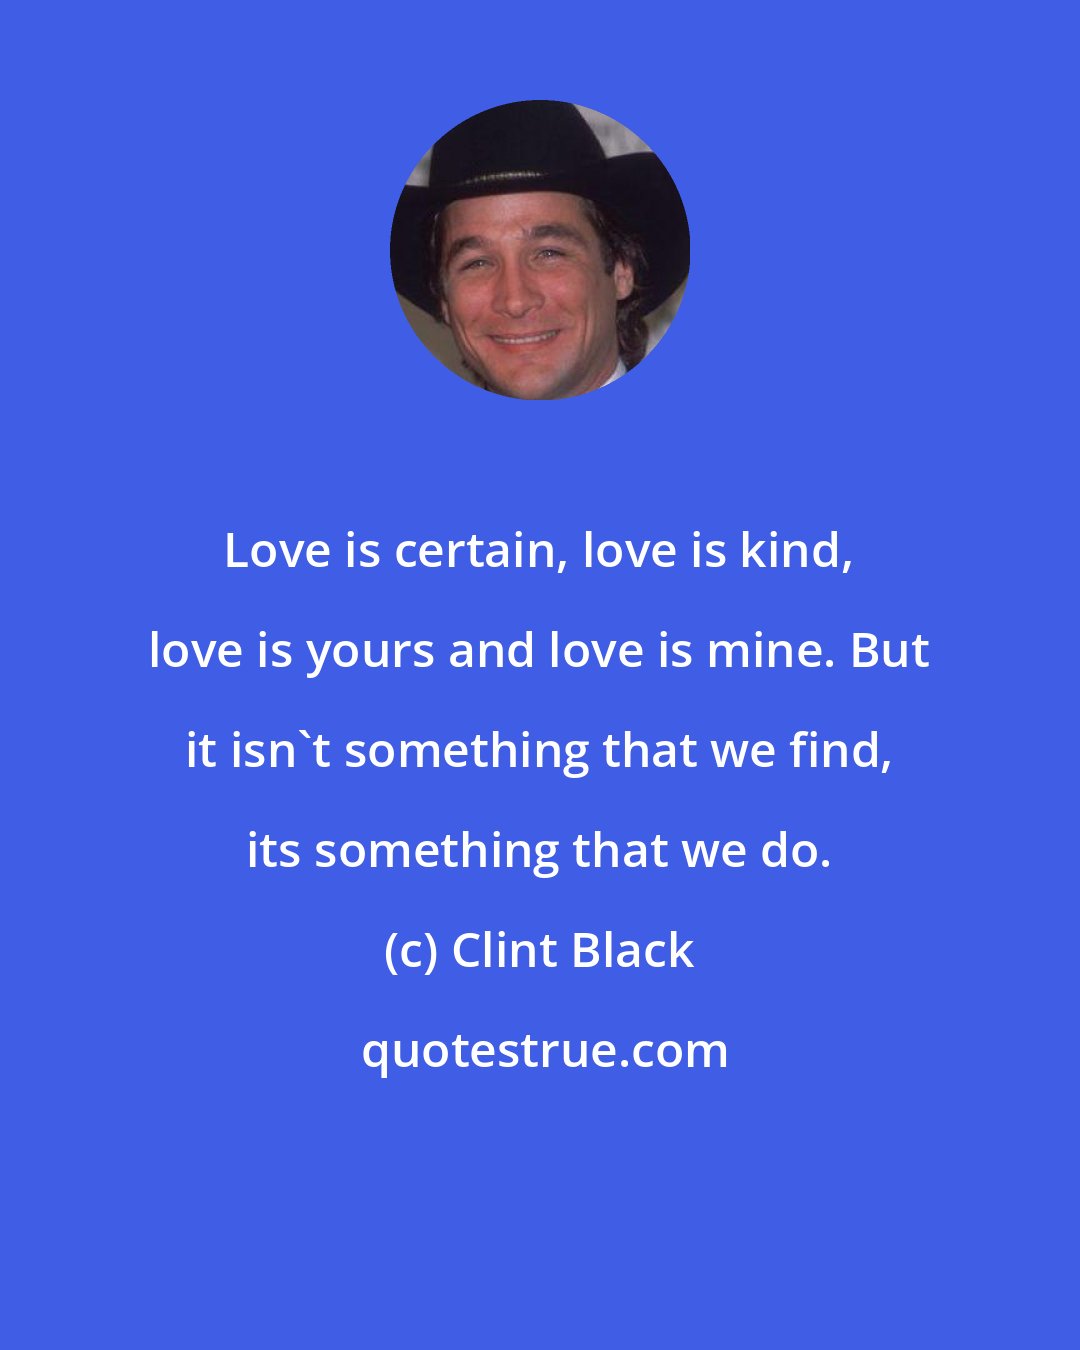 Clint Black: Love is certain, love is kind, love is yours and love is mine. But it isn't something that we find, its something that we do.